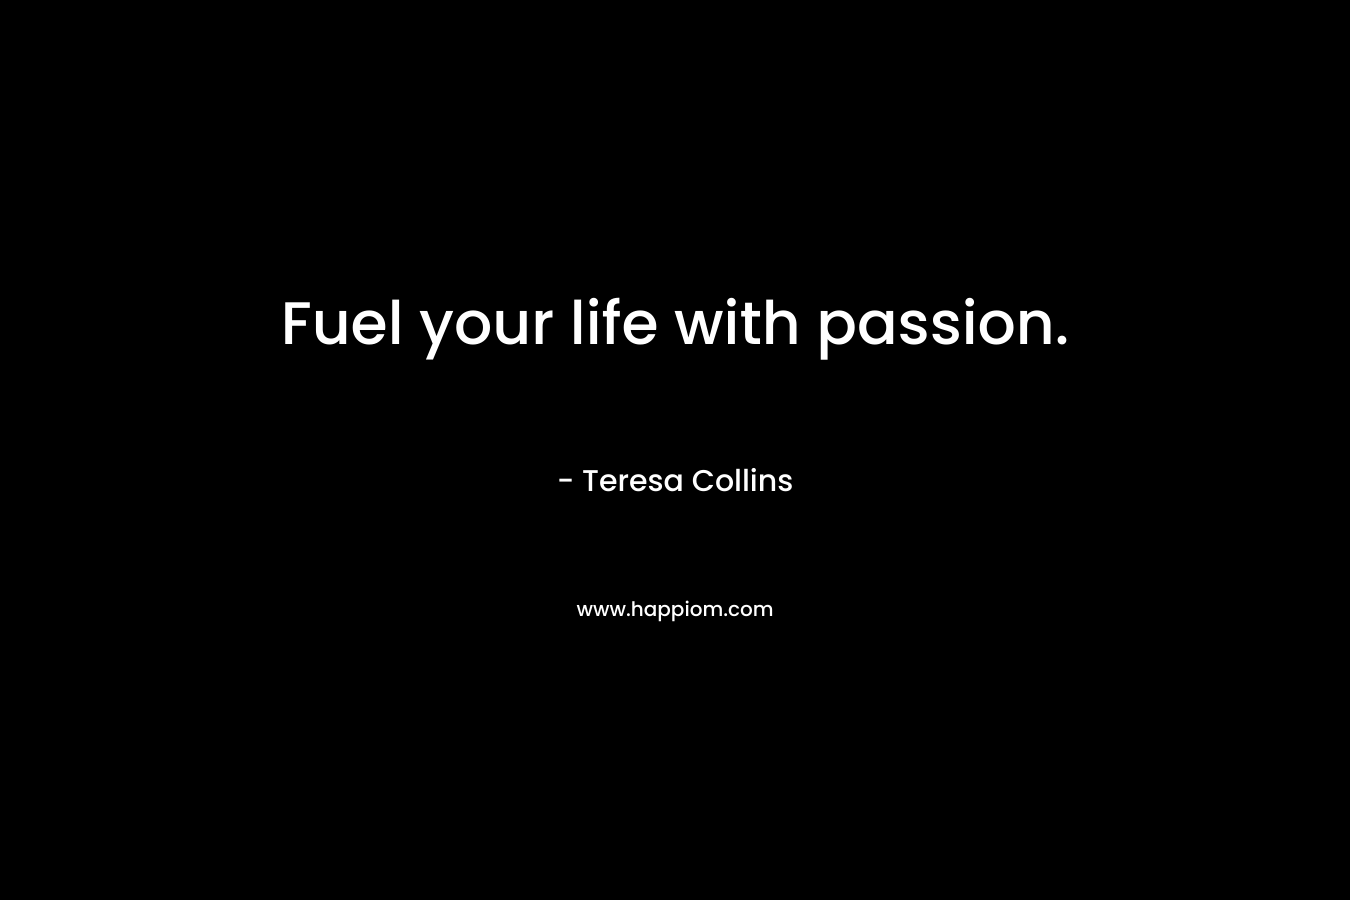 Fuel your life with passion.